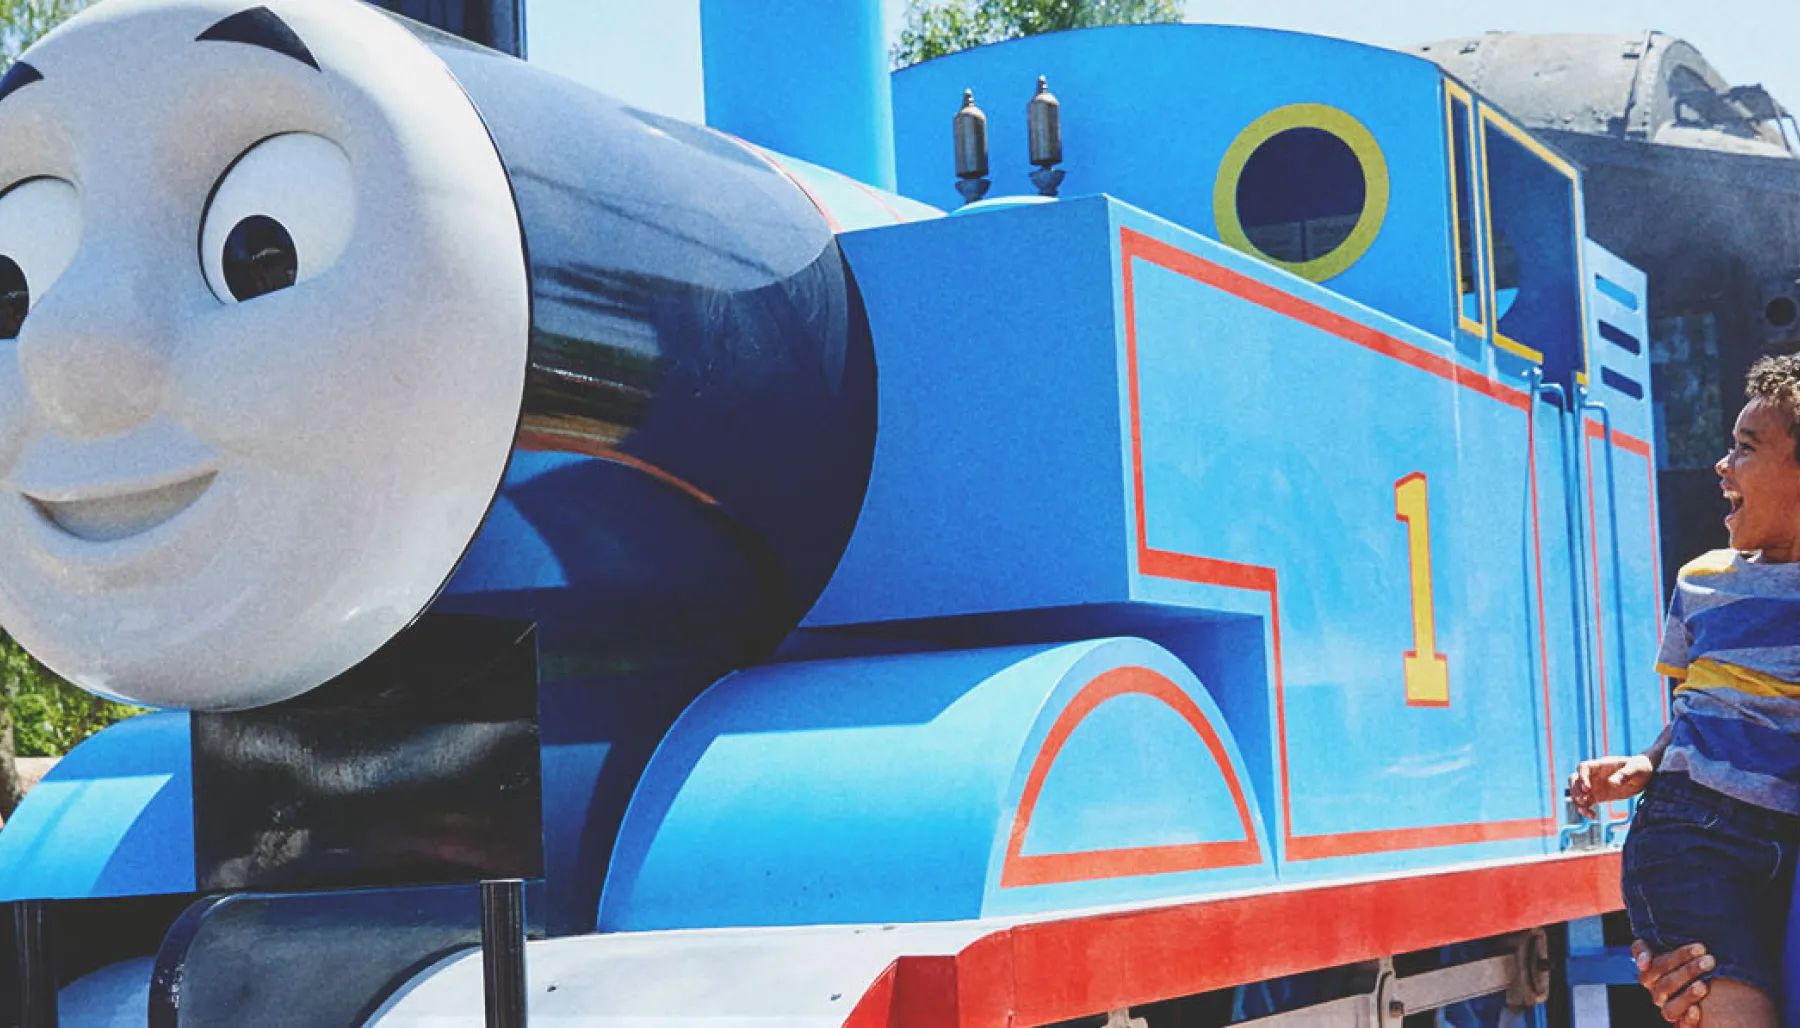 gather and son with Thomas the Tank Engine during Day Out With Thomas at Heritage Park